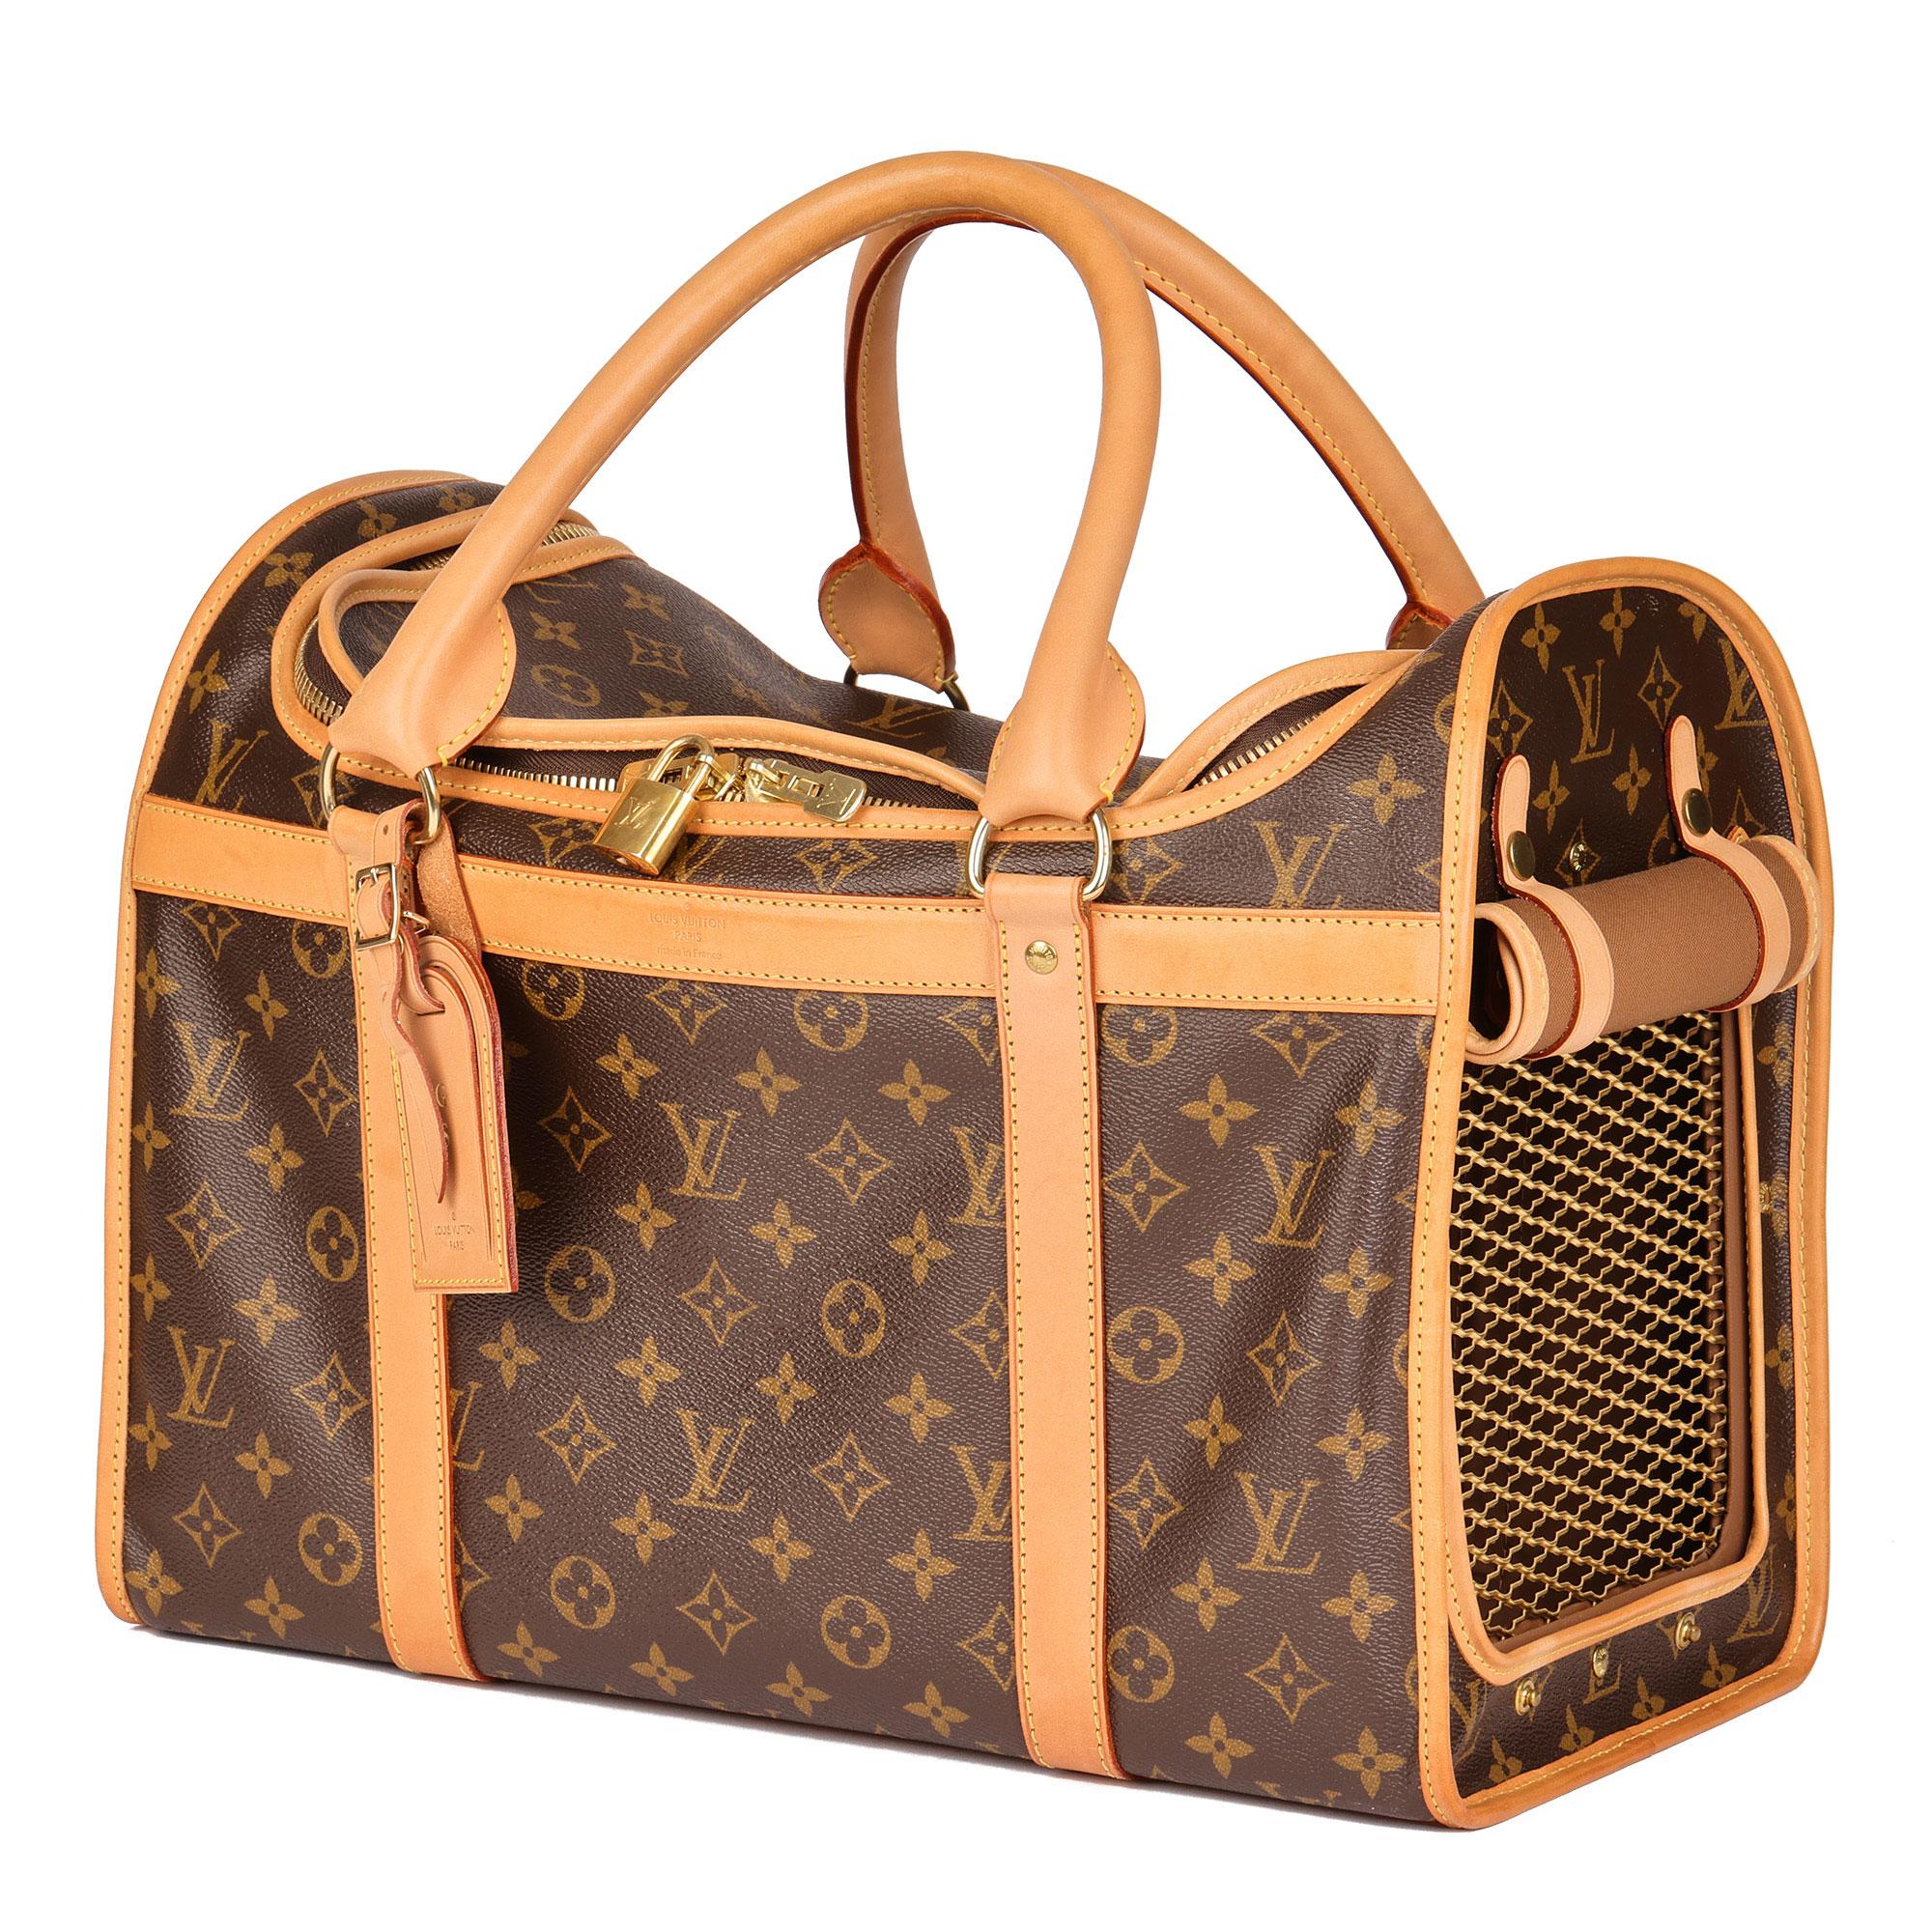 LOUIS VUITTON
Brown Monogram Coated Canvas & Vachetta Leather Sac Chien 40 Pet Carrier

Serial Number: TJ3191
Age (Circa): 2011
Accompanied By: Louis Vuitton Dust Bag, Padlock, Keys, Personalised Luggage Tag
Authenticity Details: Date Stamp (Made in